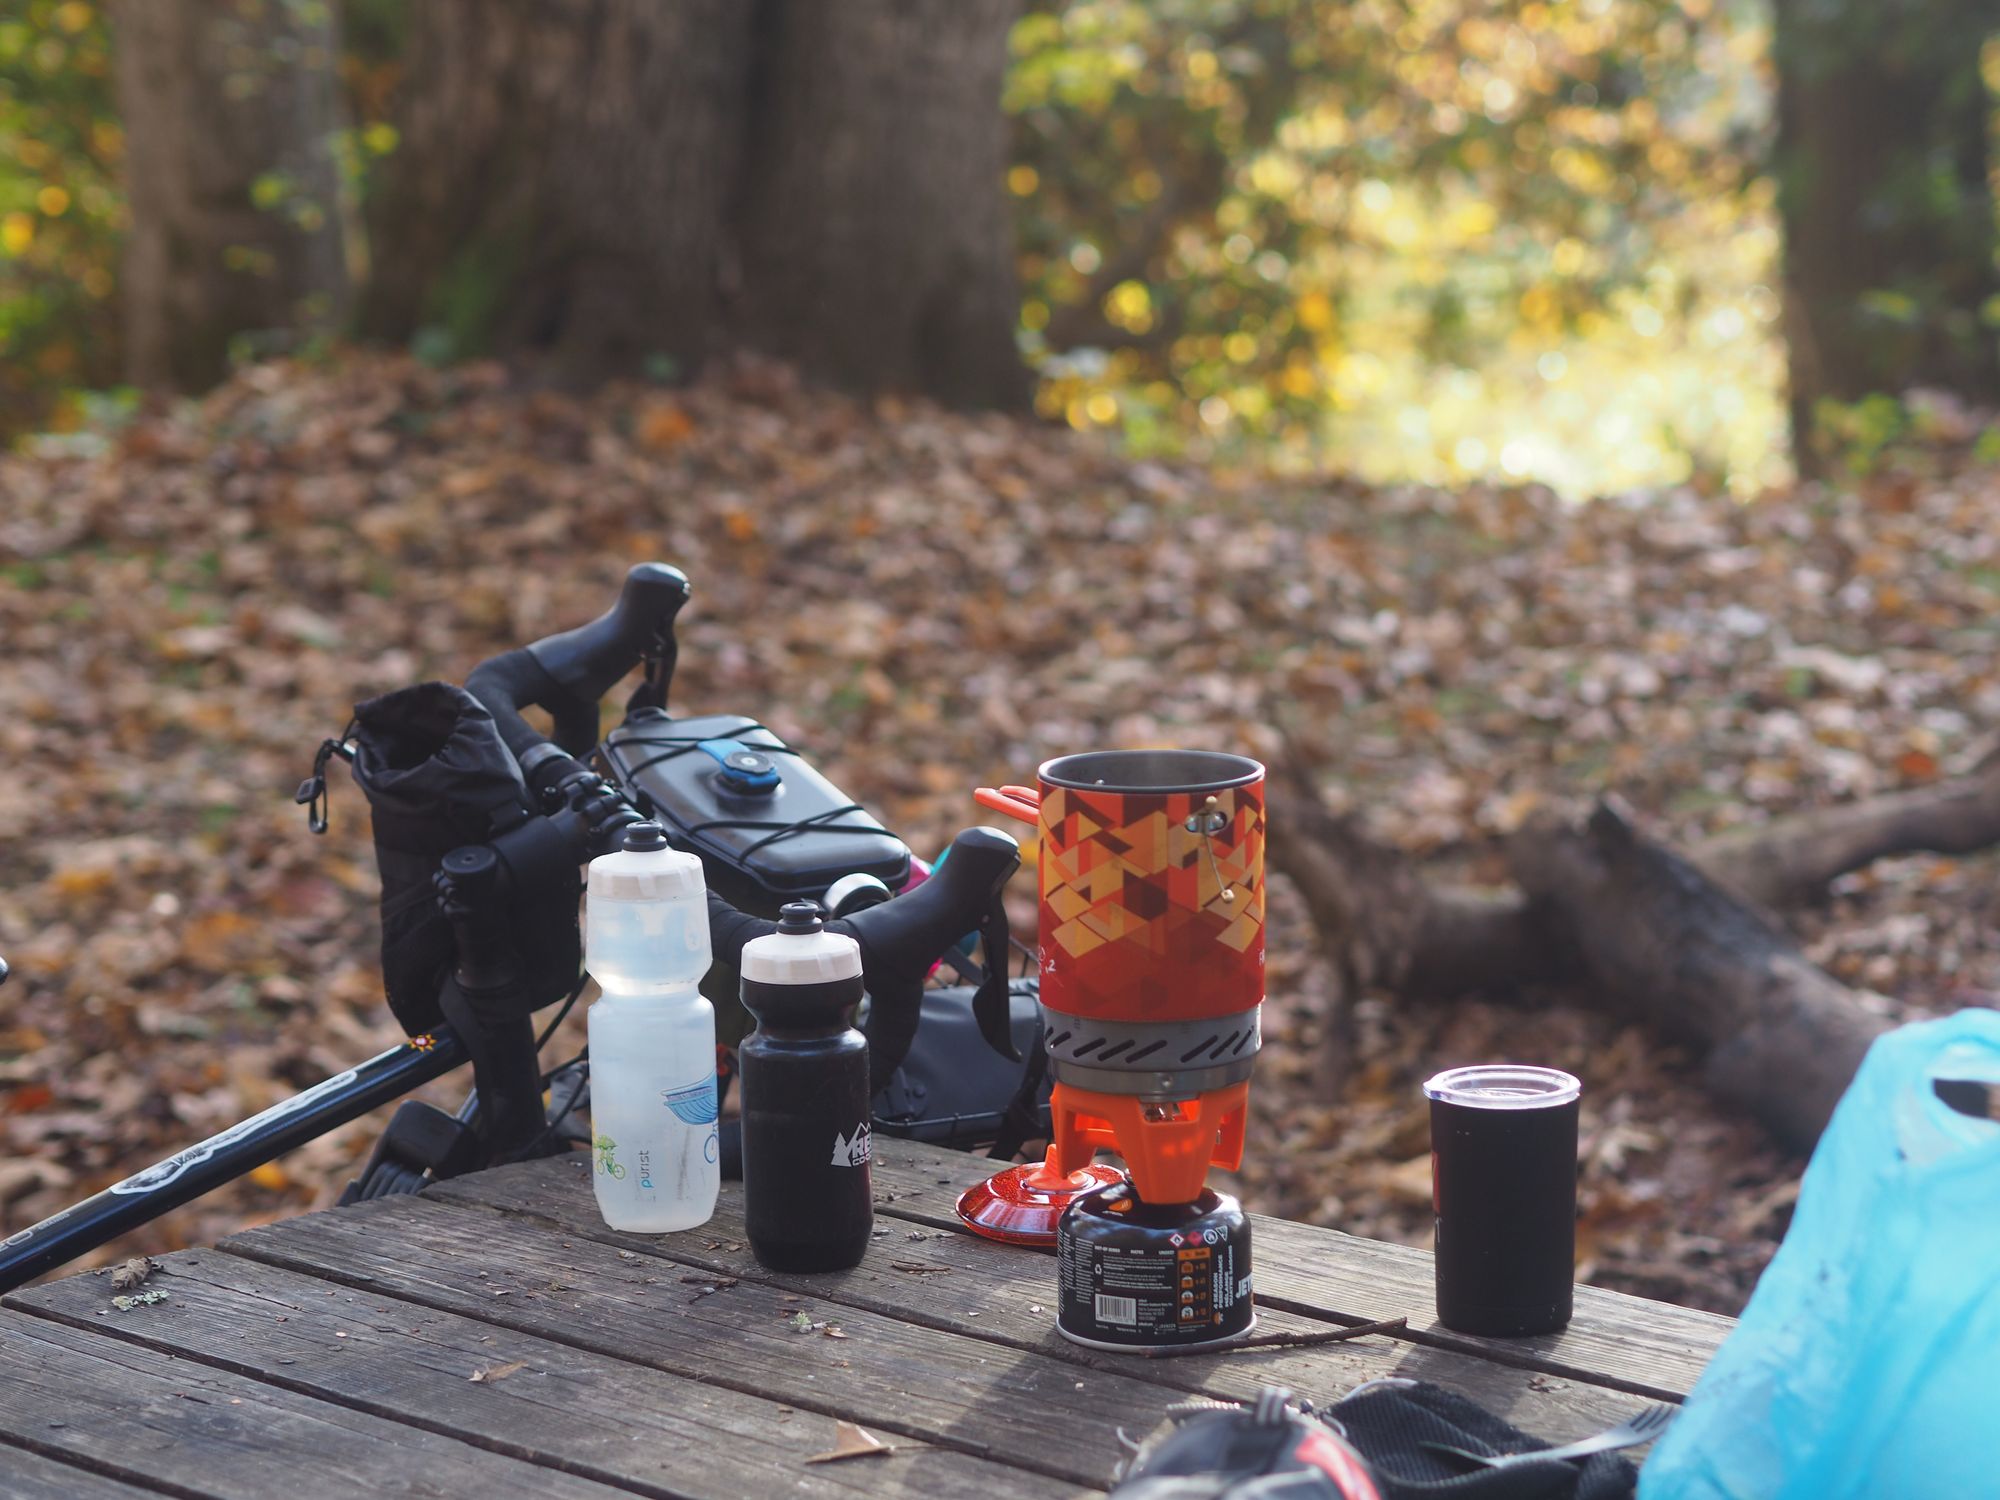 Camping kettle and fuel canister sitting on top of a picnic table in the forest with a bicycle leaning against the table in the background.